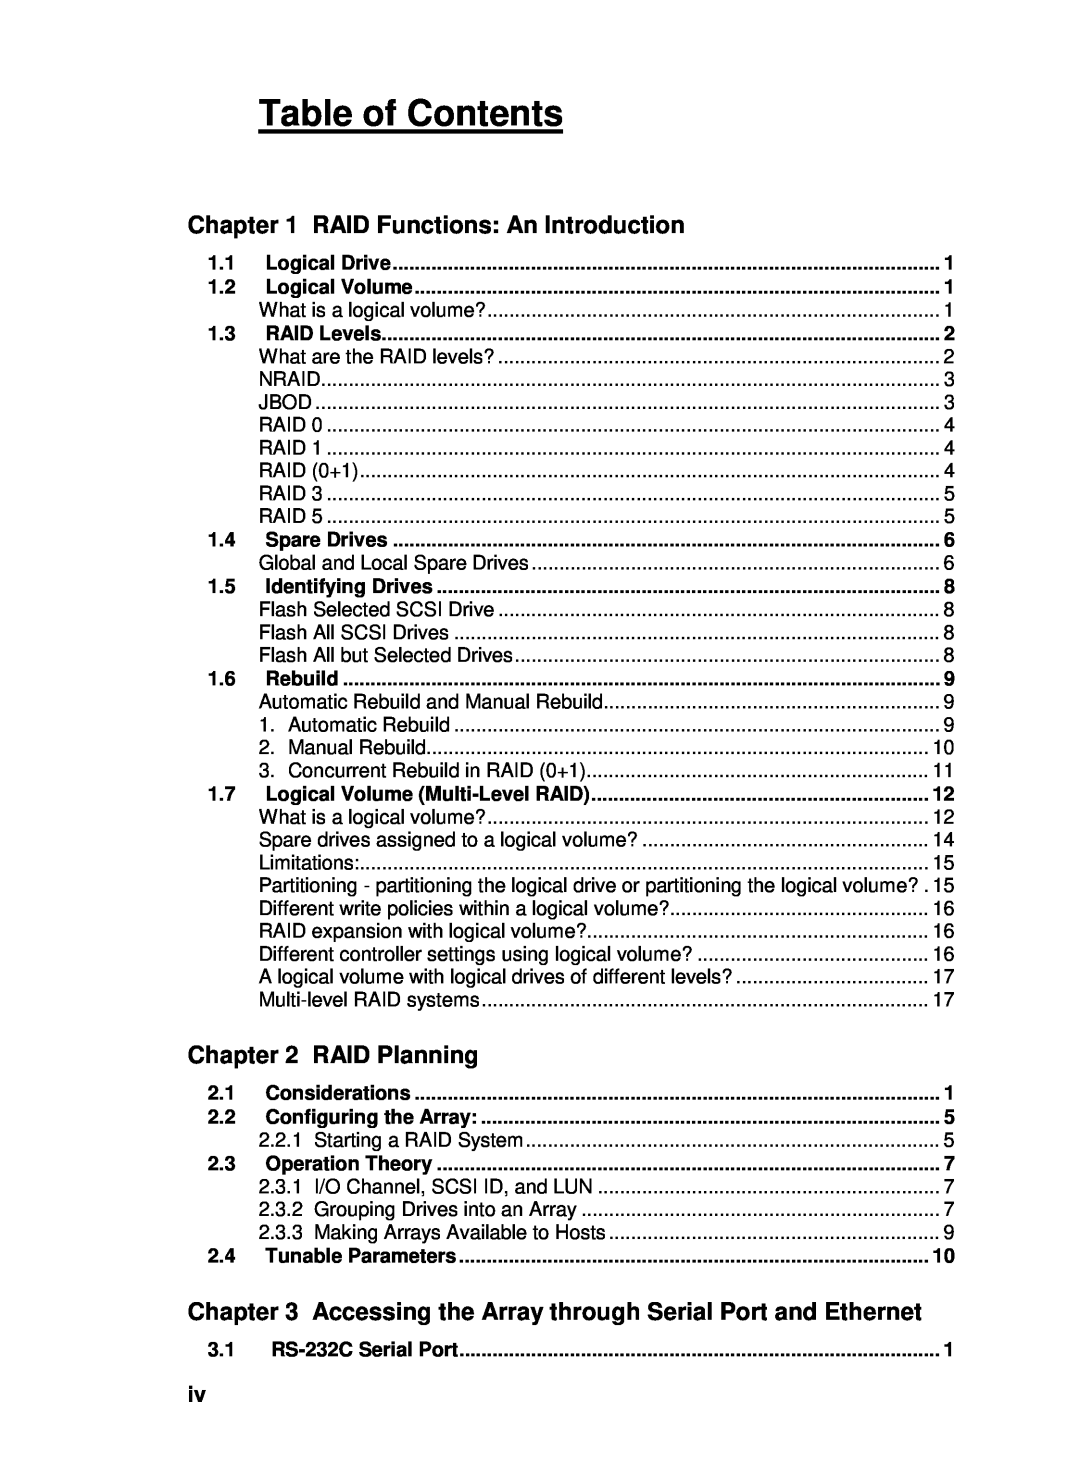 Compaq Infortrend manual Table of Contents, RAID Functions An Introduction, RAID Planning 